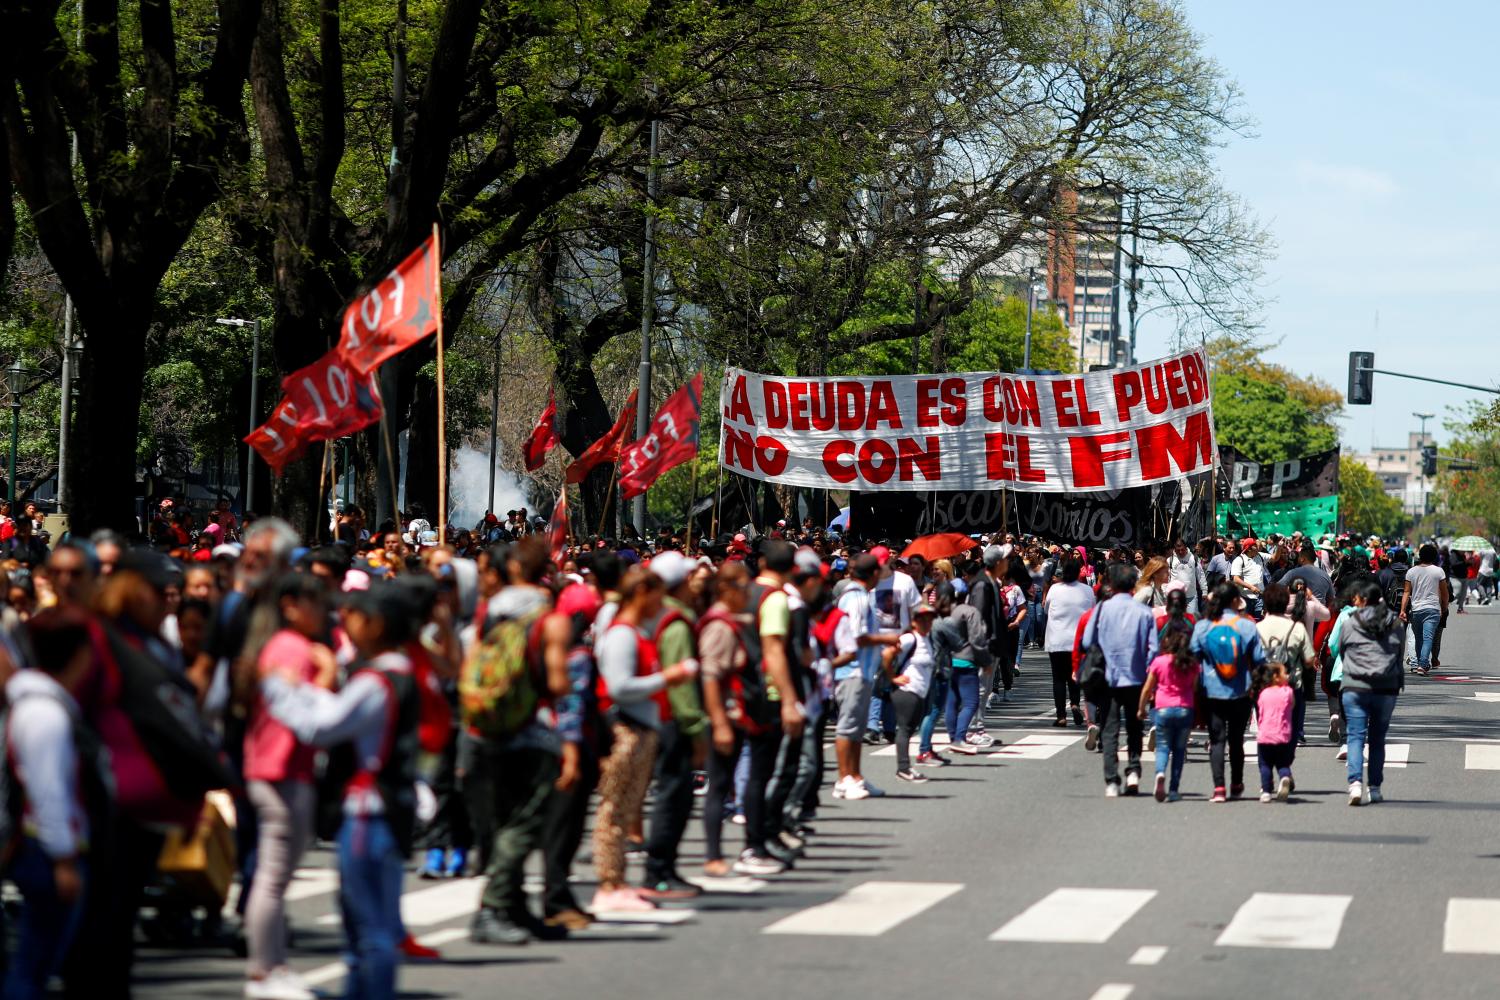 Demonstrators march during a protest against the austerity measures mandated by the IMF during President Mauricio Macri's administration, in Buenos Aires, Argentina October 31, 2019. The banner reads: "The debt is to the people, not to the IMF." REUTERS/Agustin Marcarian